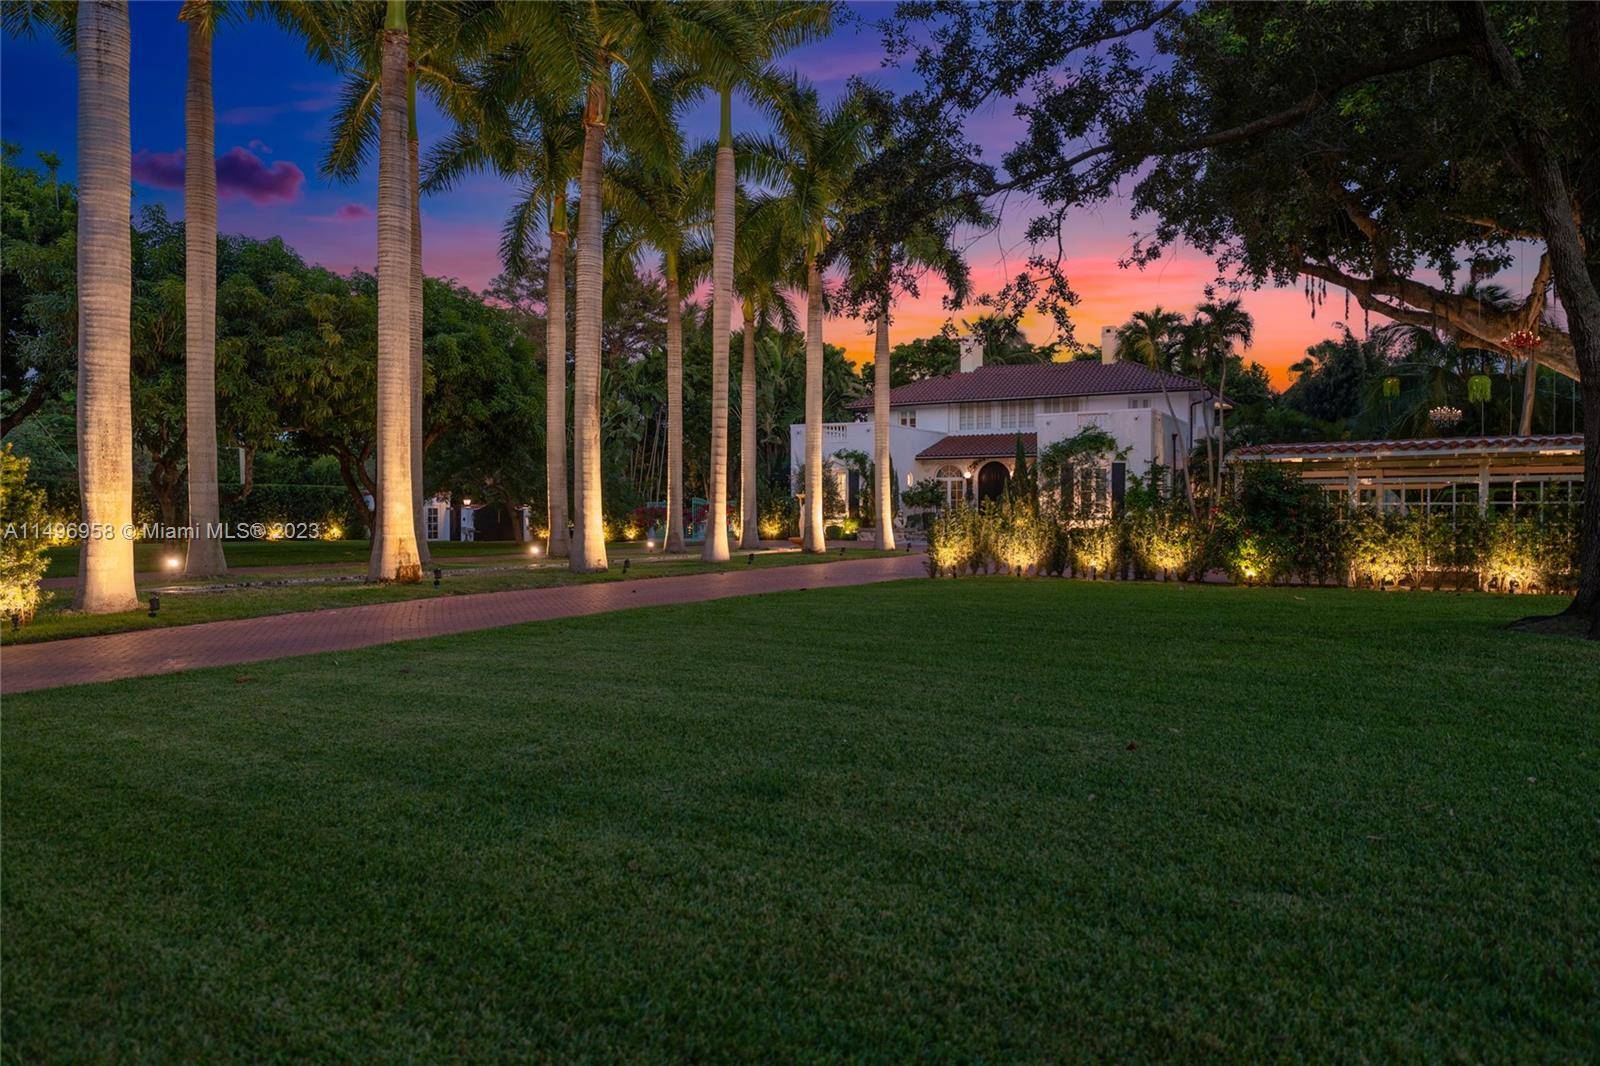 Rare chance to own a 1. 5 acre estate with complete privacy, two gated entrances, and a walled in lot.